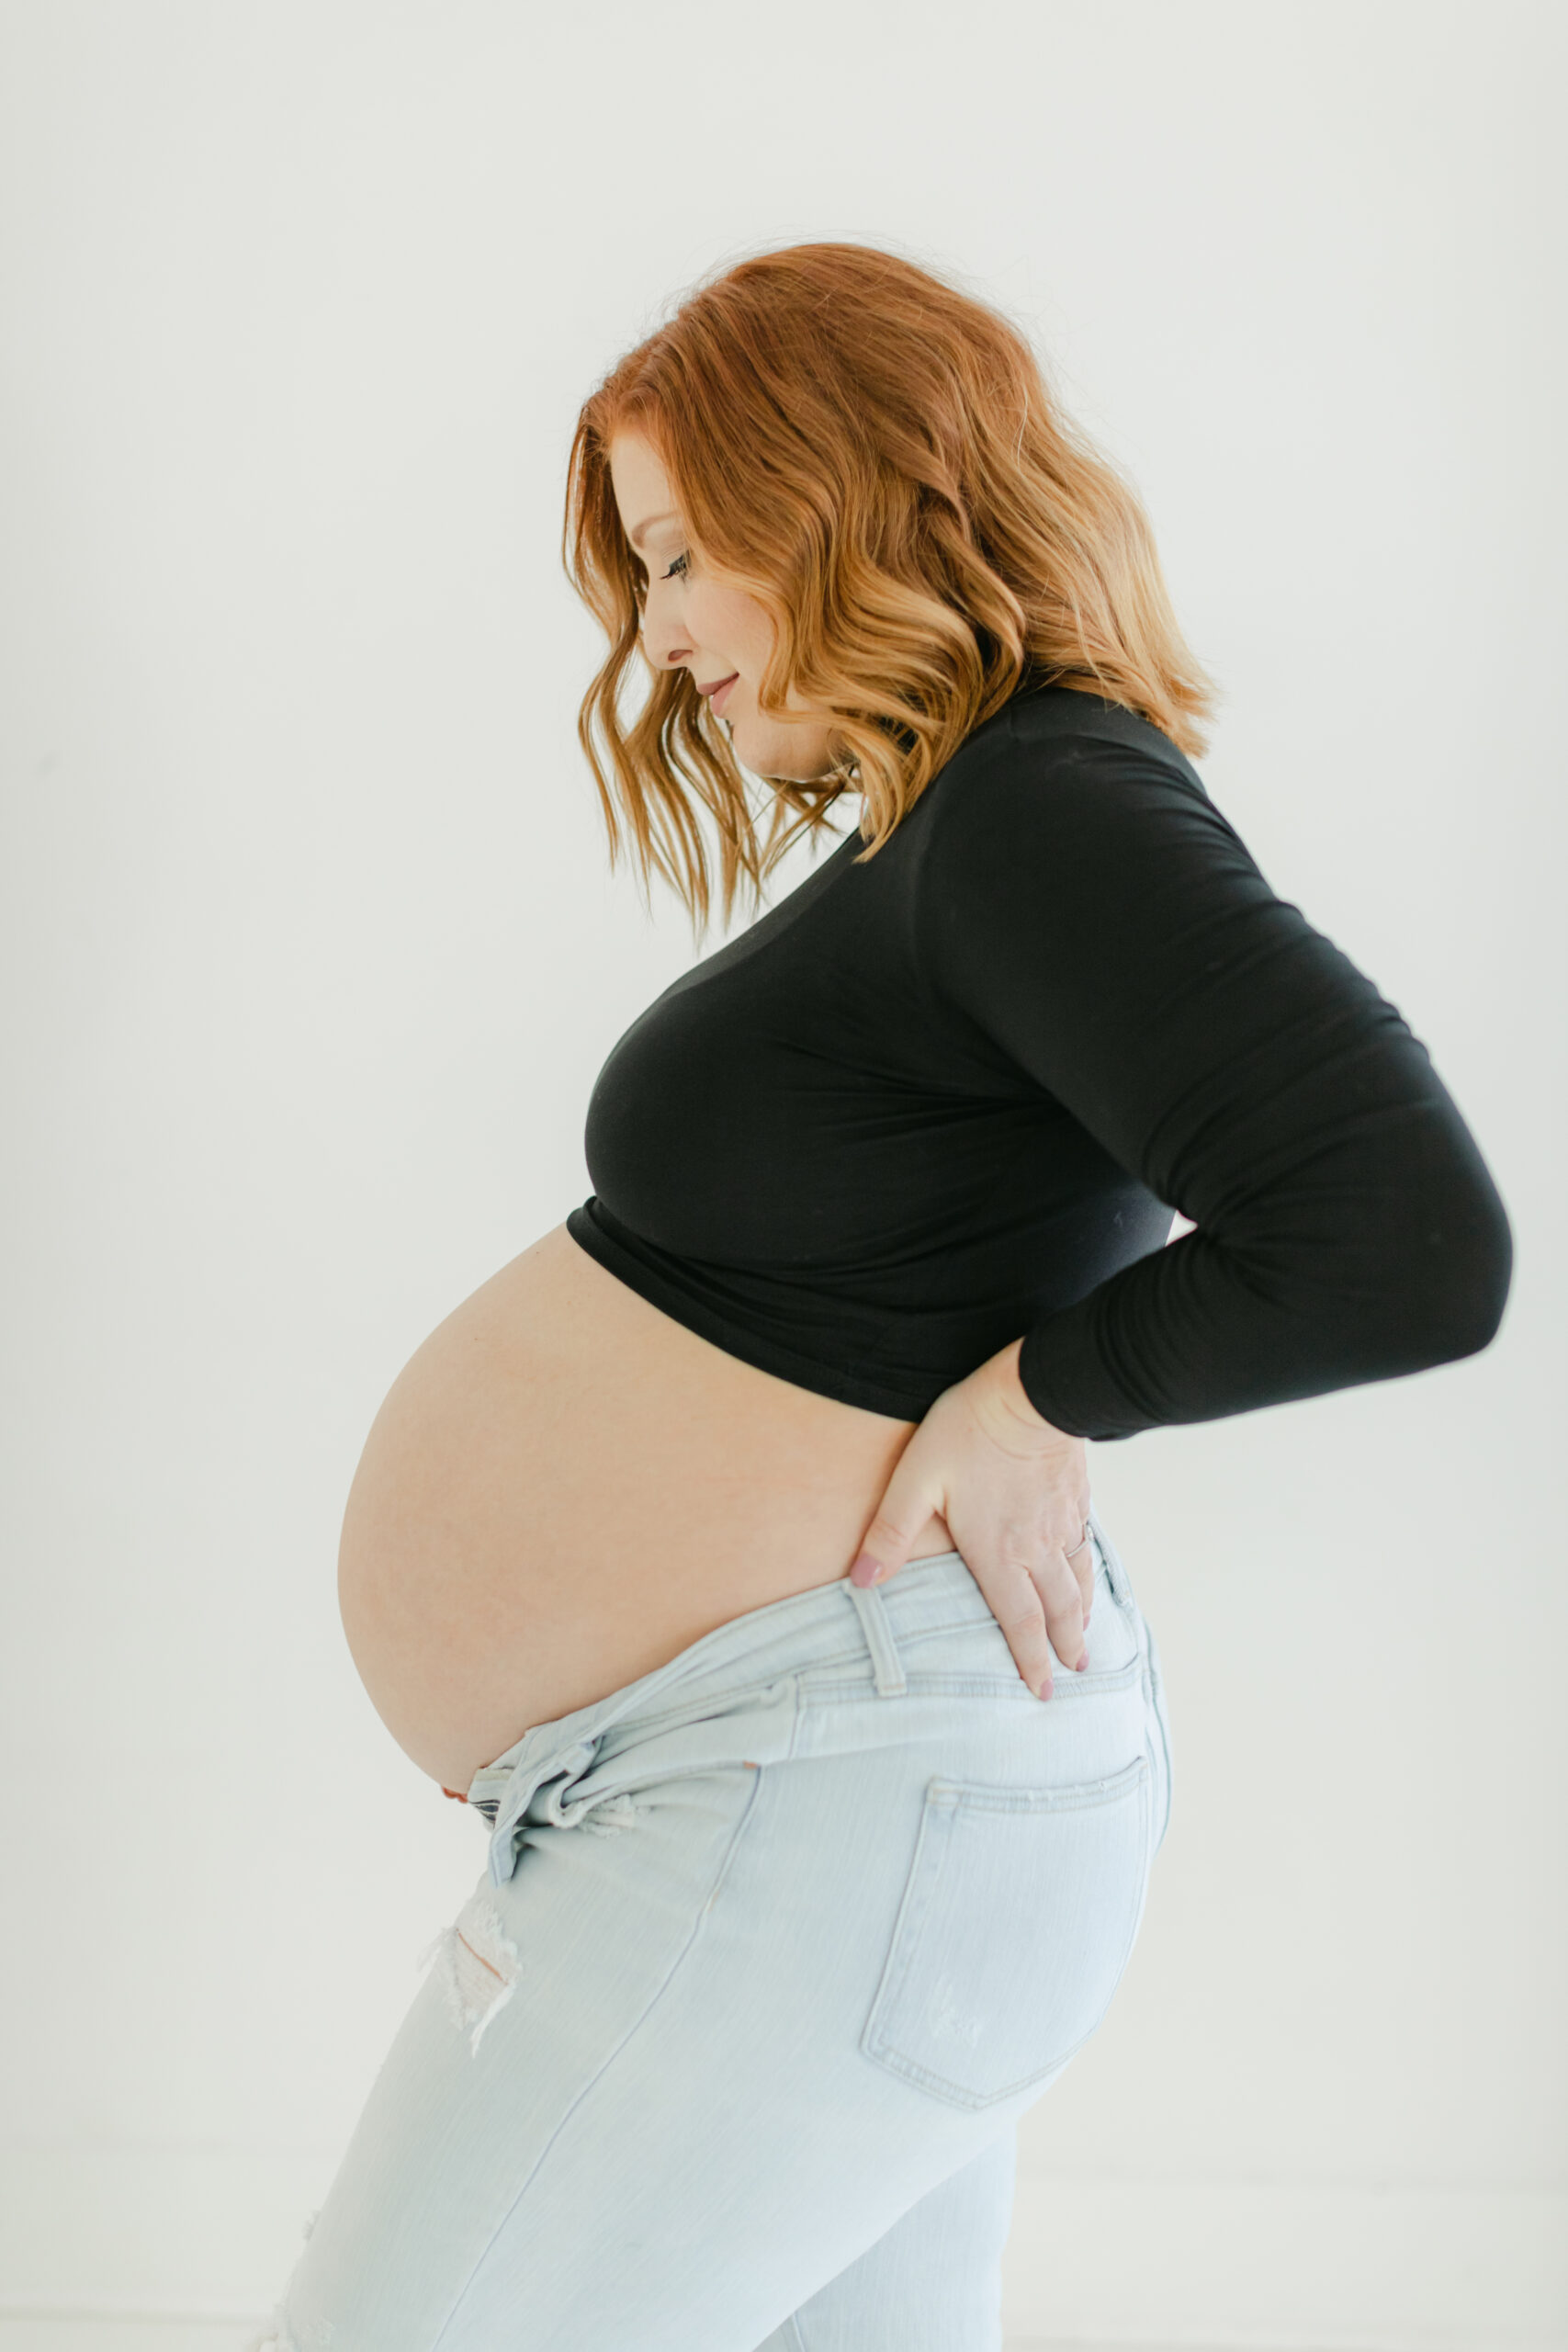 Photo of a pregnant woman as an example of maternity photography in Alpharetta GA by Atlanta maternity photographer Christy Strong Photography